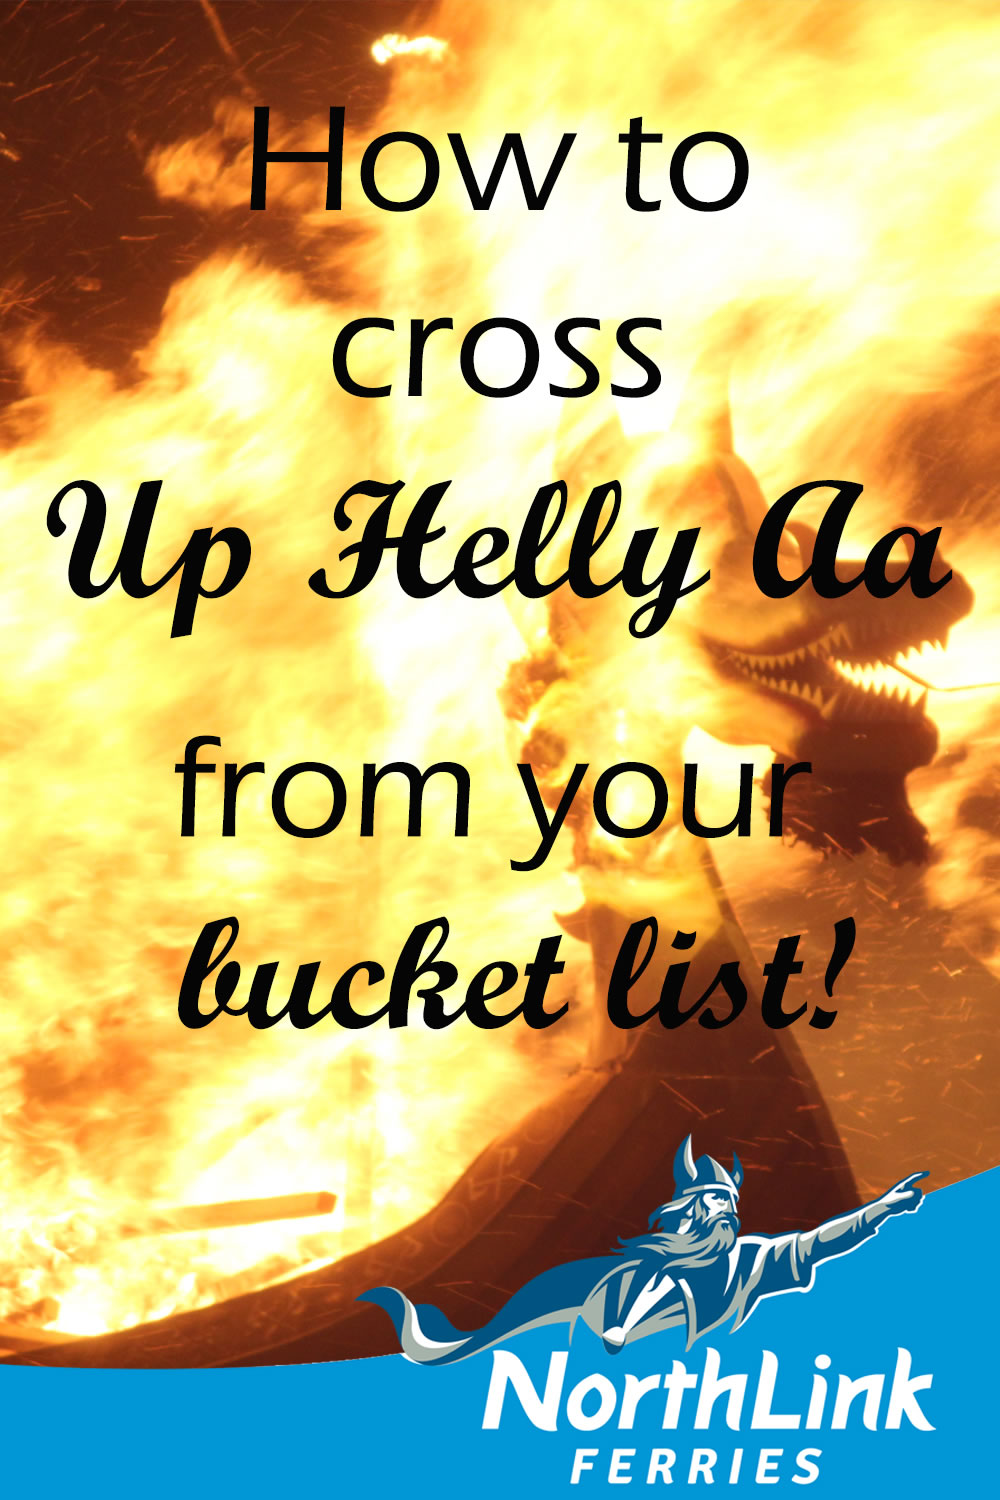 How to cross Up Helly Aa from your bucket list!